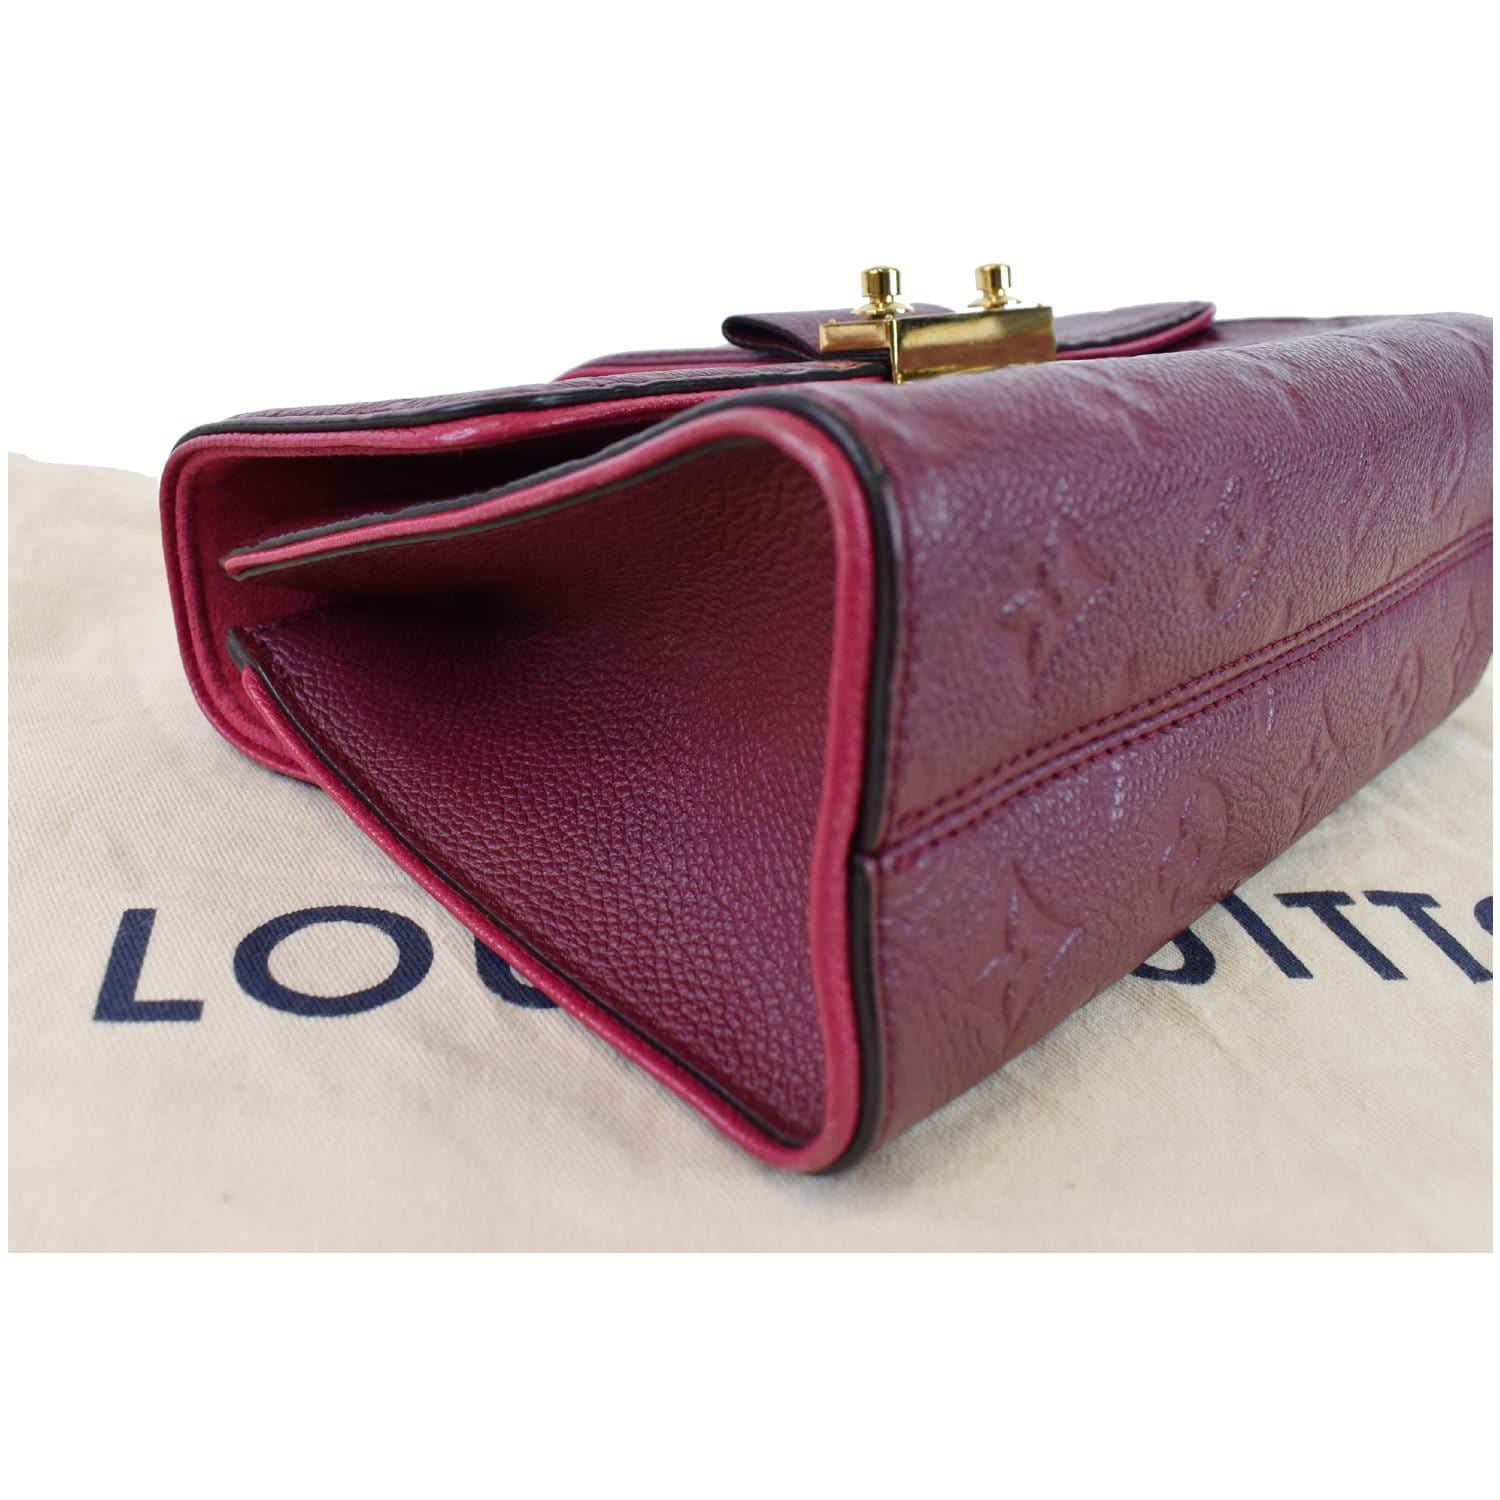 Saint sulpice leather handbag Louis Vuitton Red in Leather - 29858701